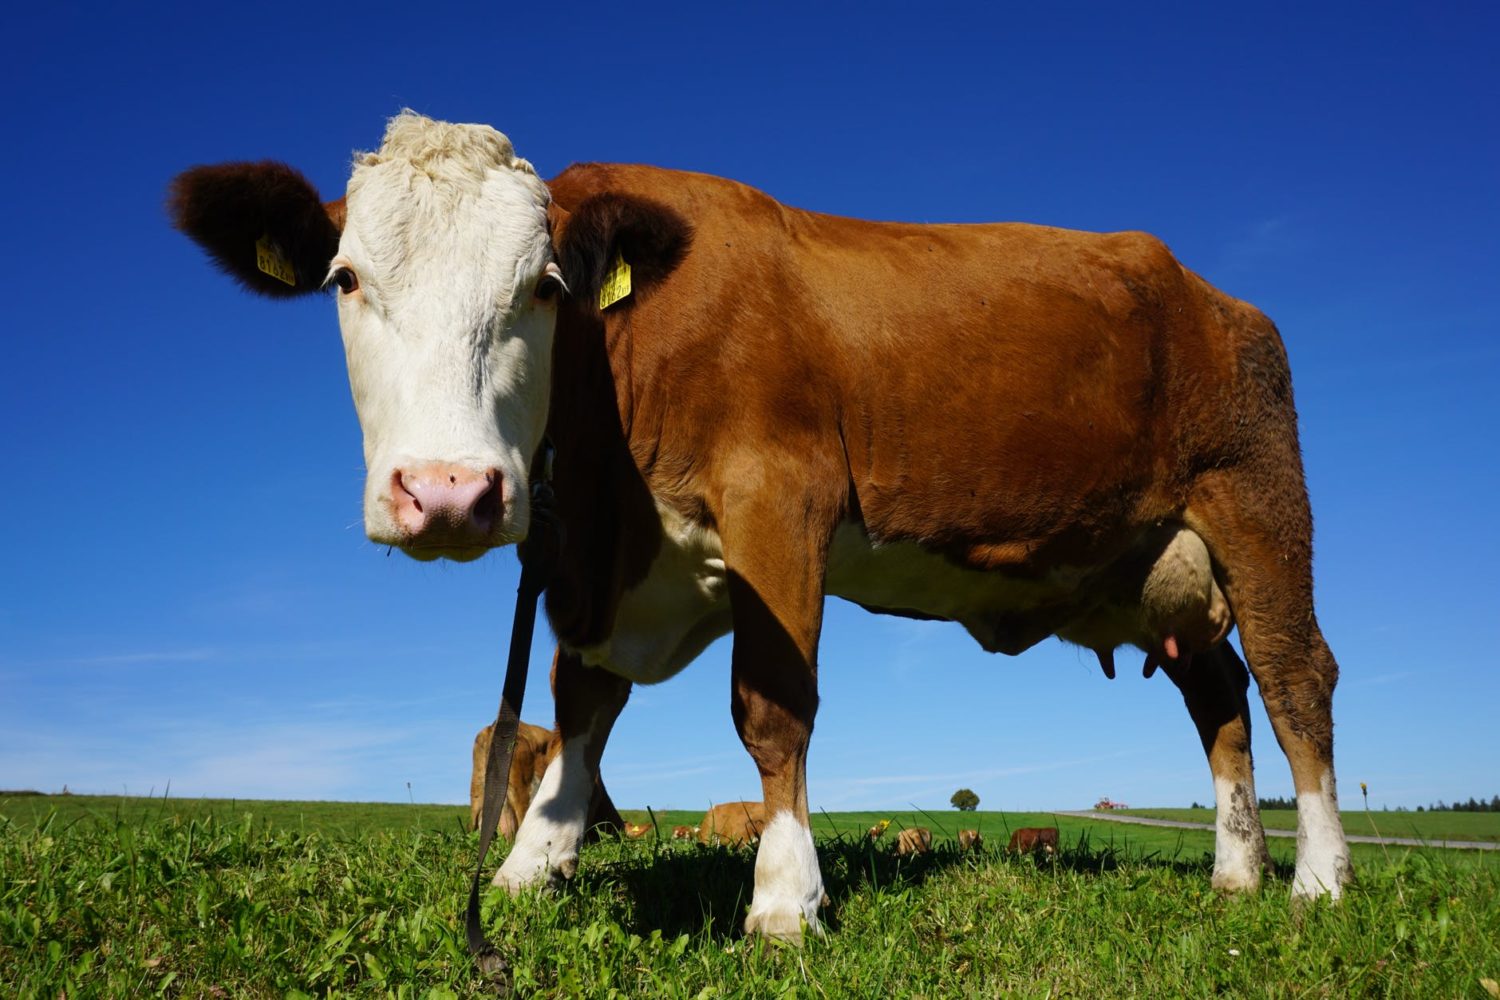 Cow - dairy foods may protect against type 2 diabetes